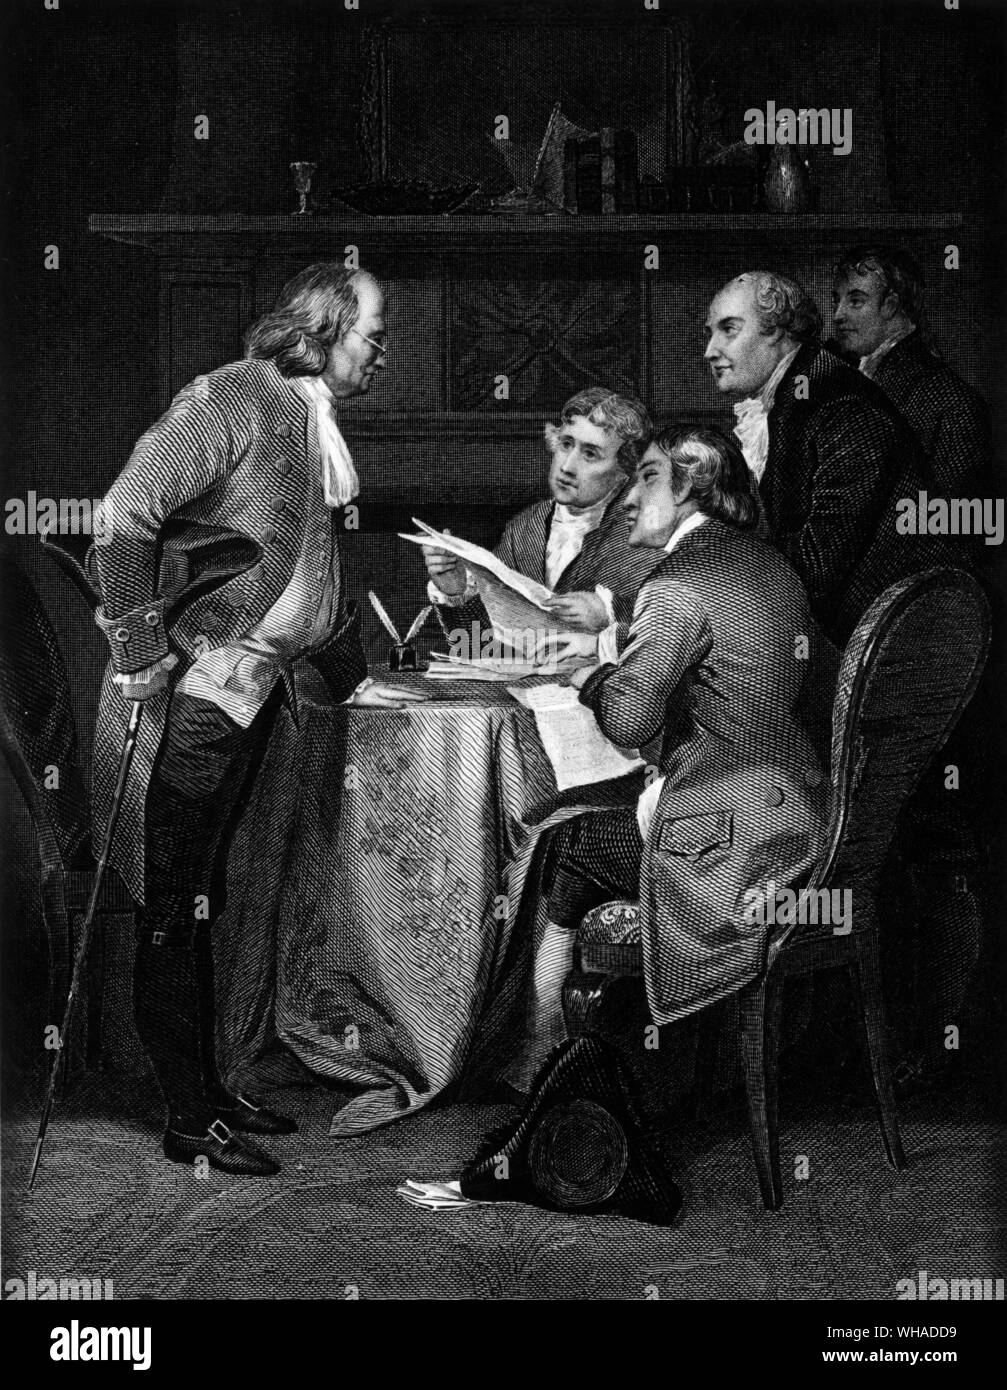 Franklyn, Adams, Sherman and Livingstone with Jefferson writing the Declaration of Independence Stock Photo